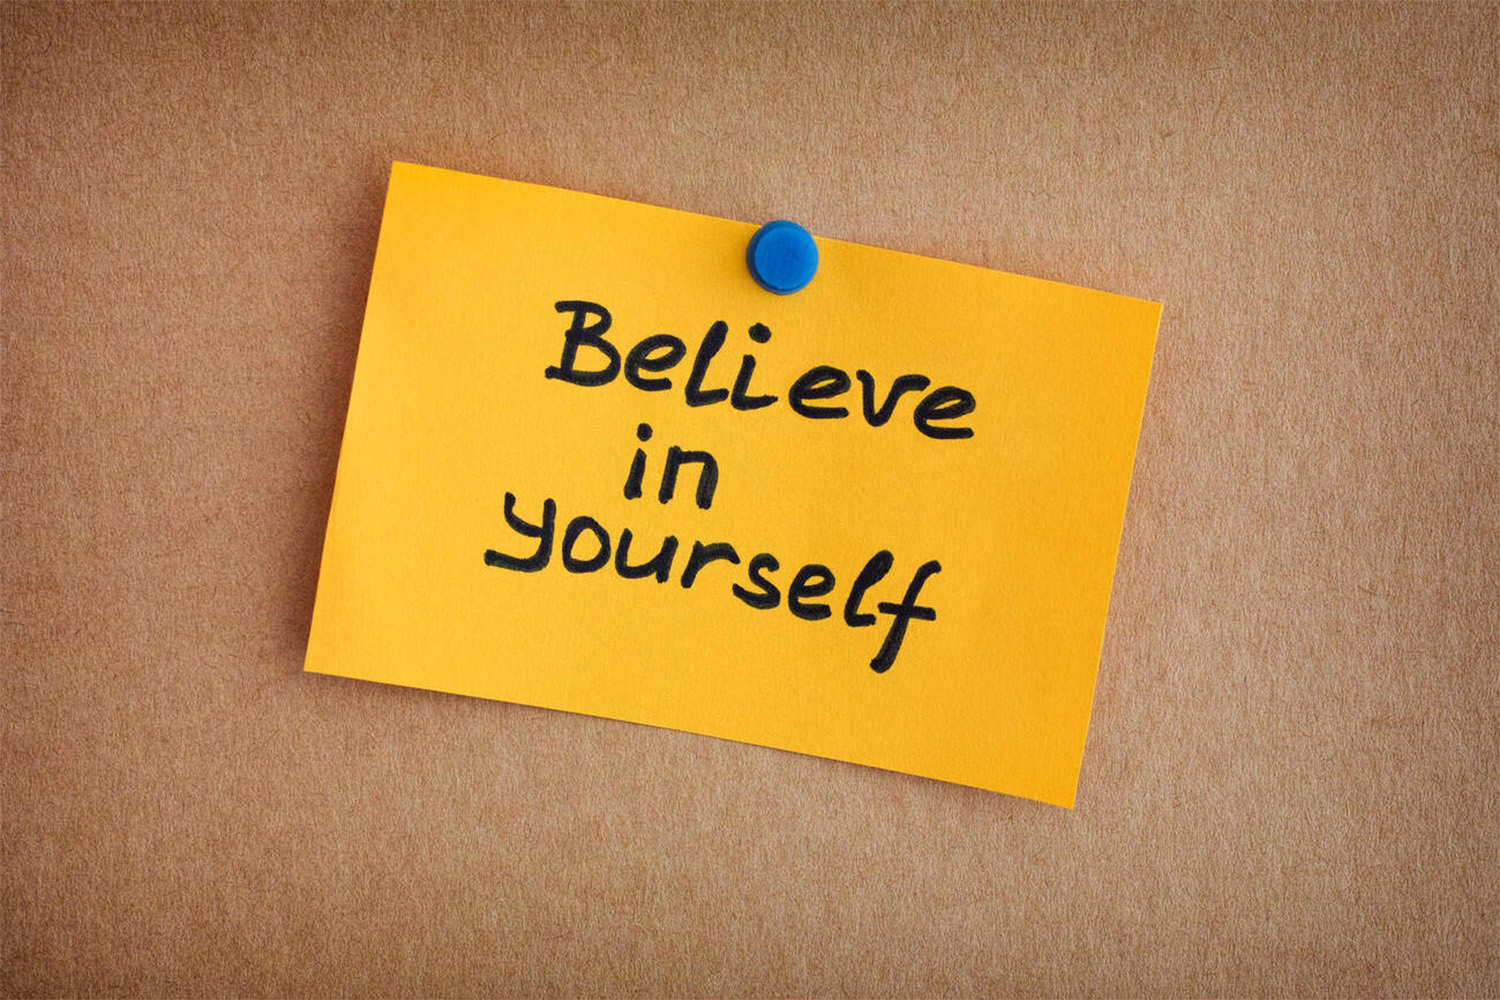 how to believe in yourself